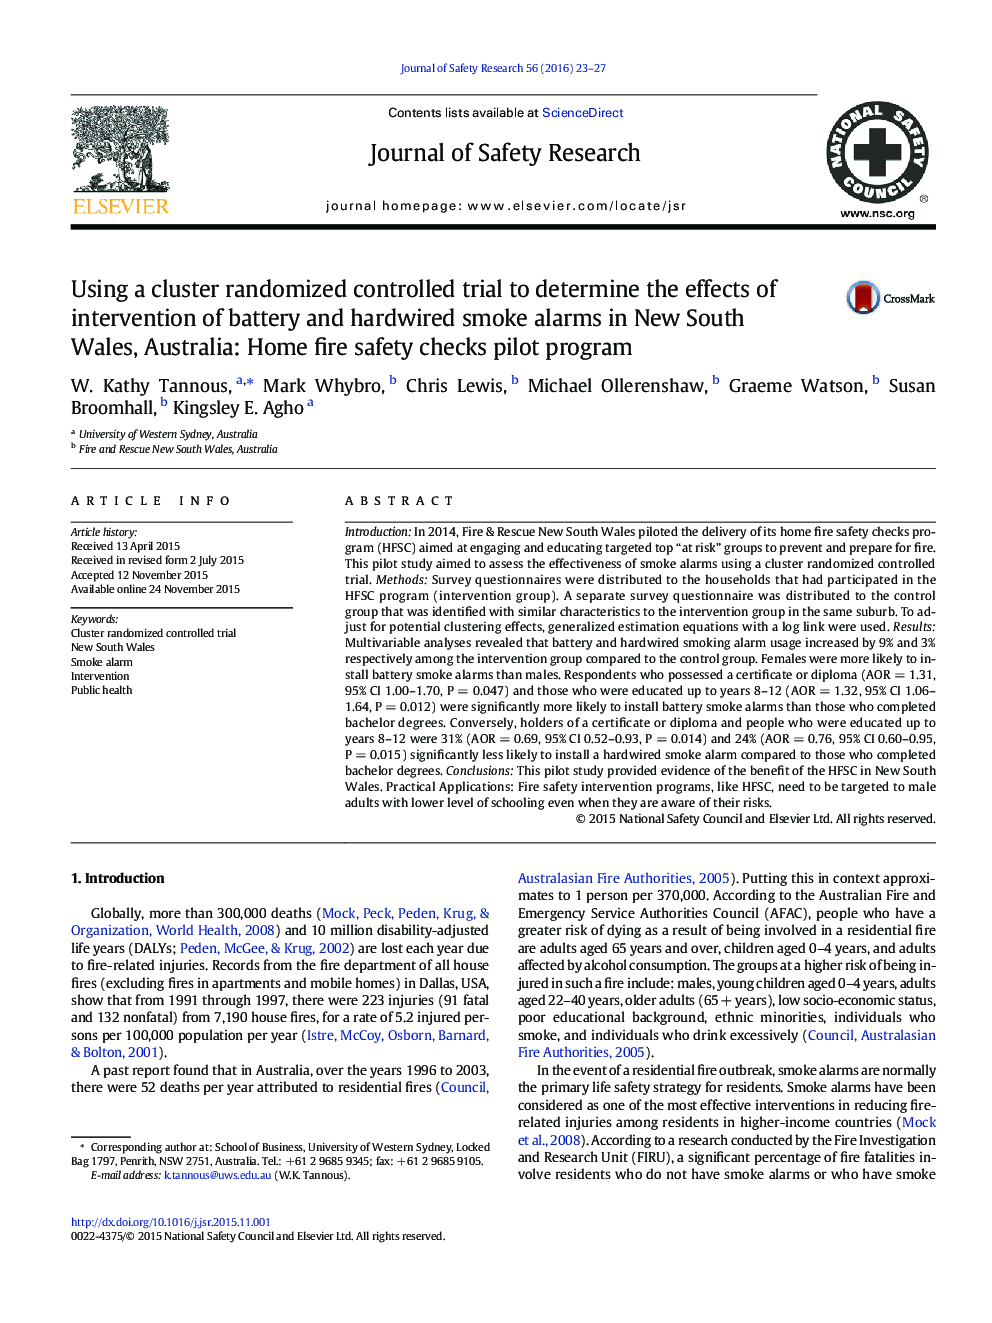 Using a cluster randomized controlled trial to determine the effects of intervention of battery and hardwired smoke alarms in New South Wales, Australia: Home fire safety checks pilot program